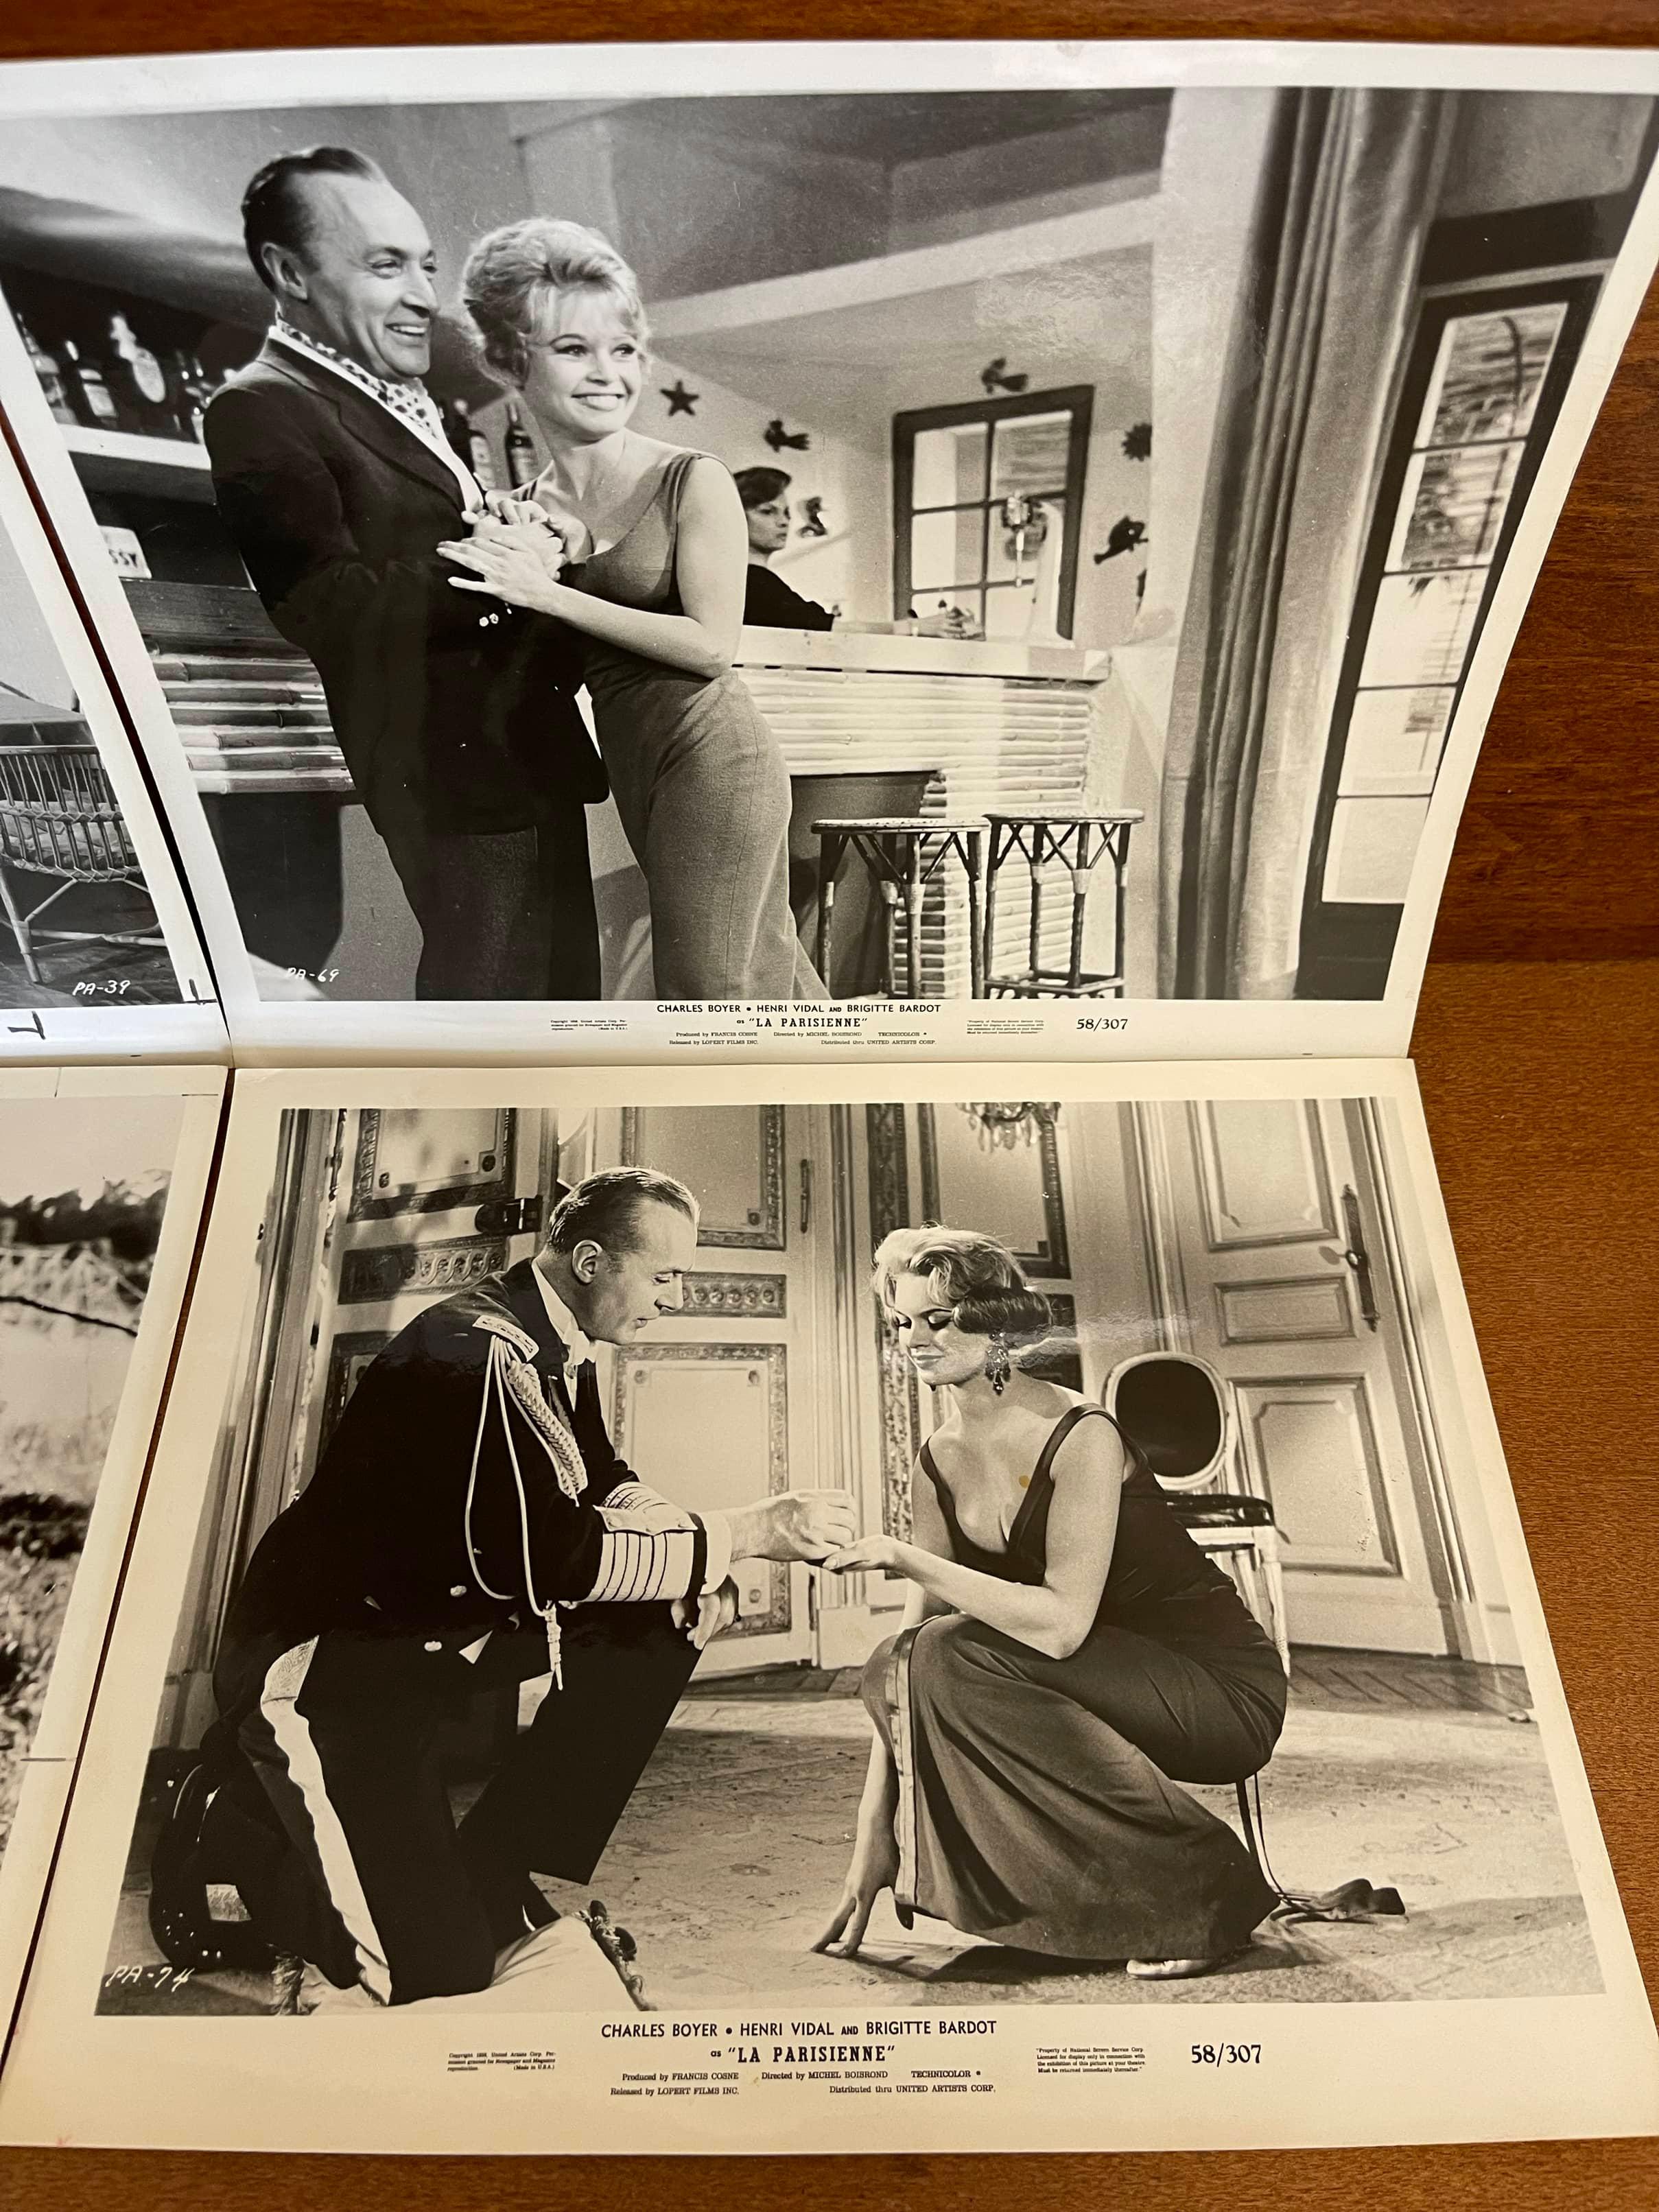 Four Brigitte Bardot Photos from The Bride is Too Much and La Parisienne (1958)